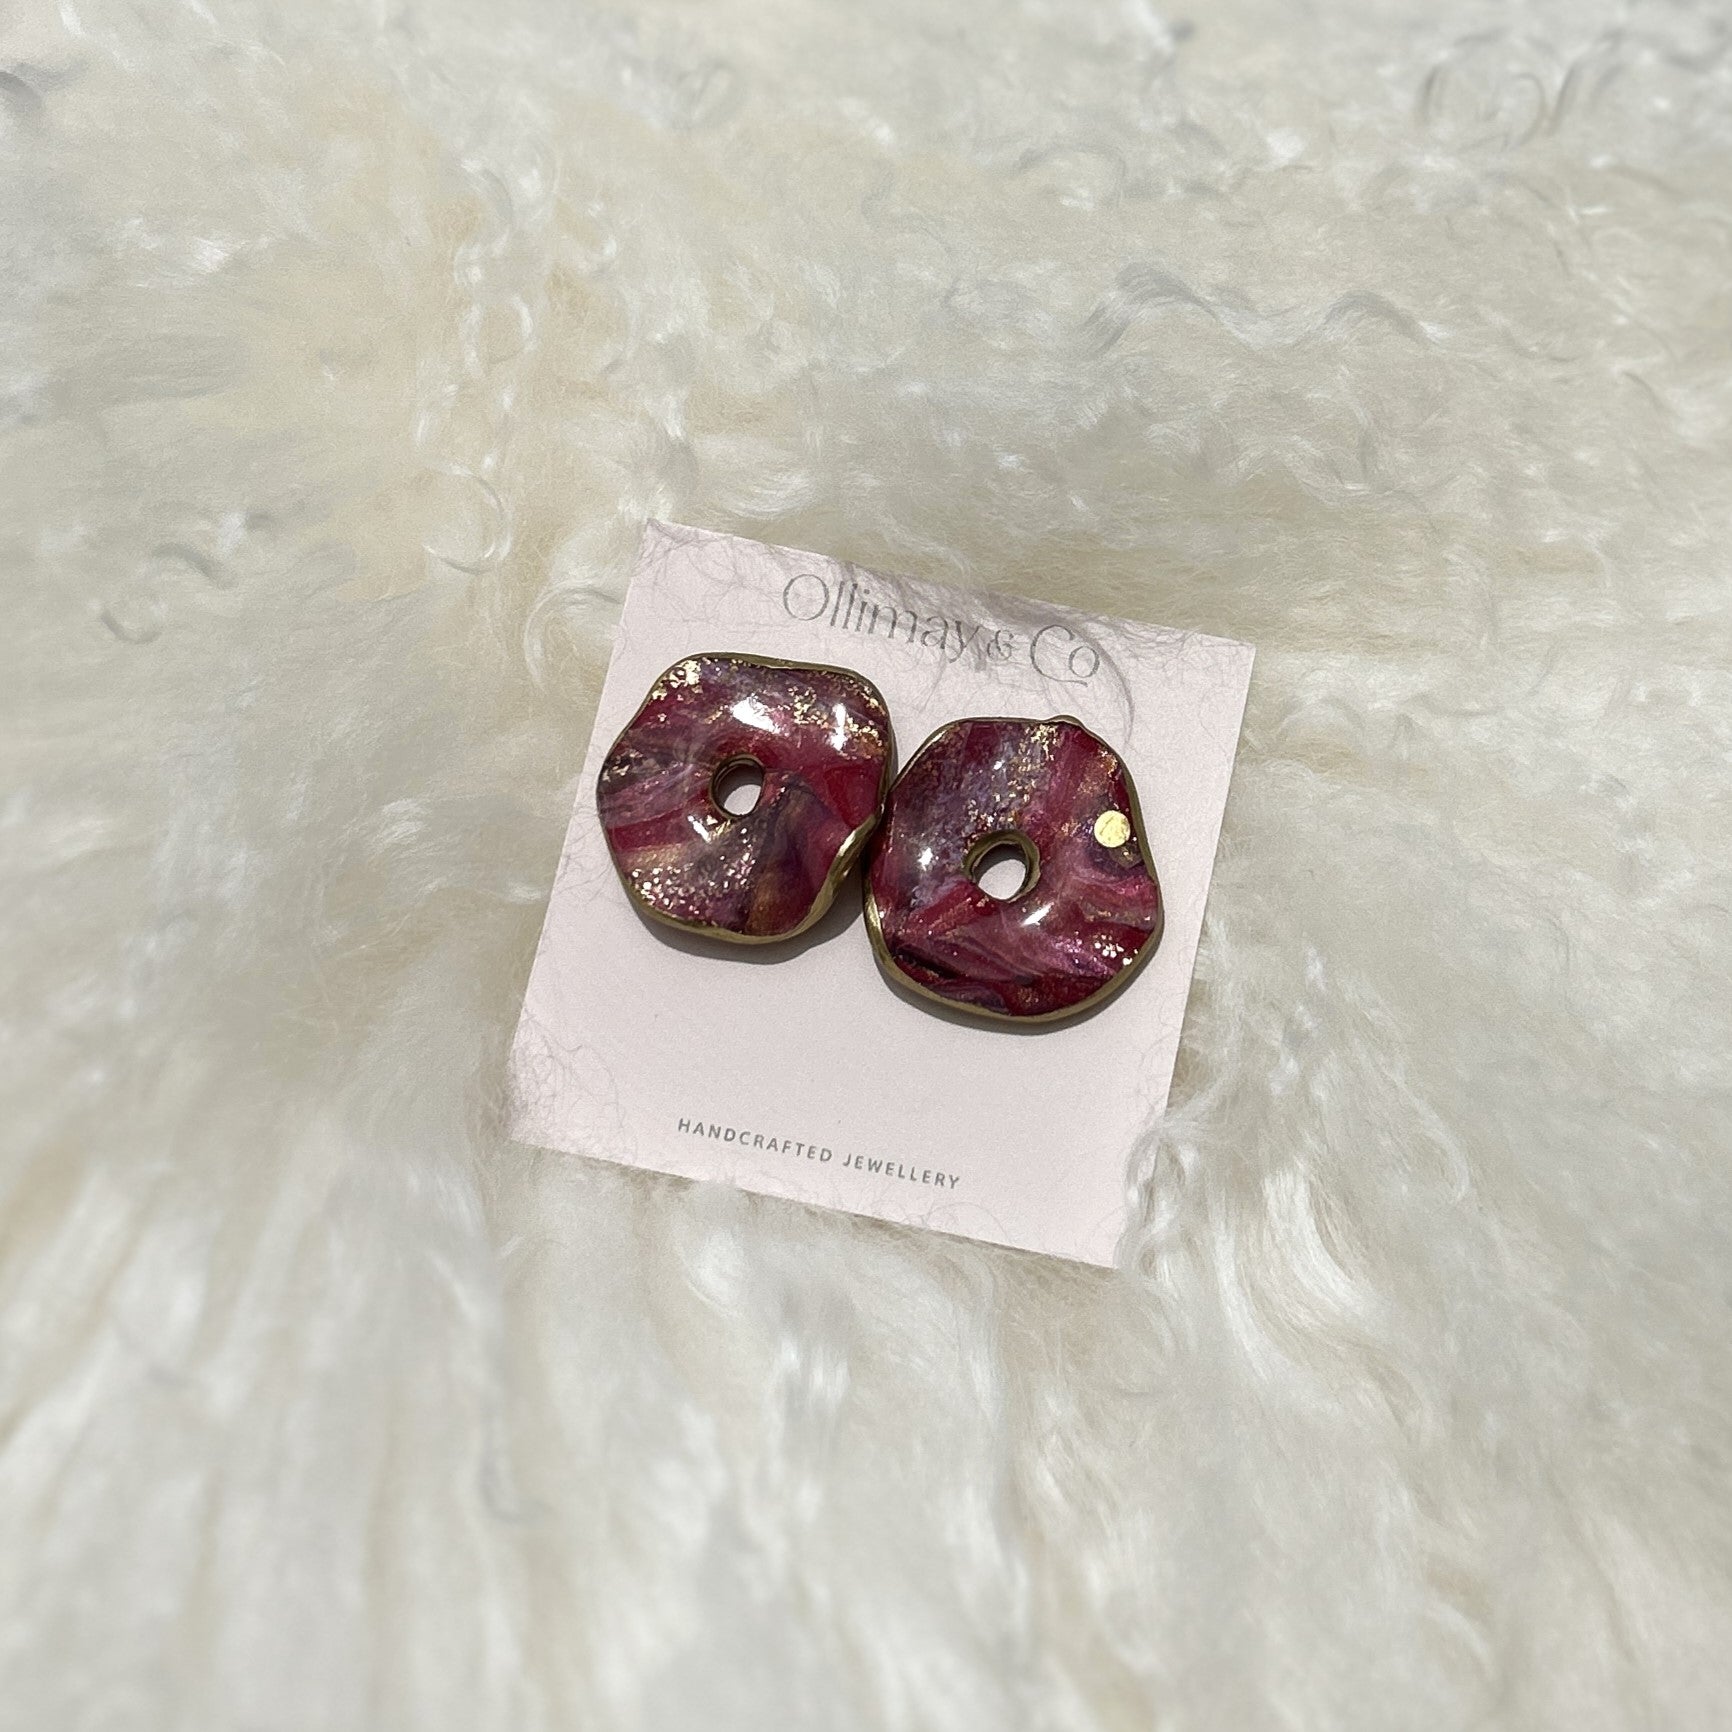 Organic Shape Round Ruby Agate Stud Earrings - Ollimay and Co. 